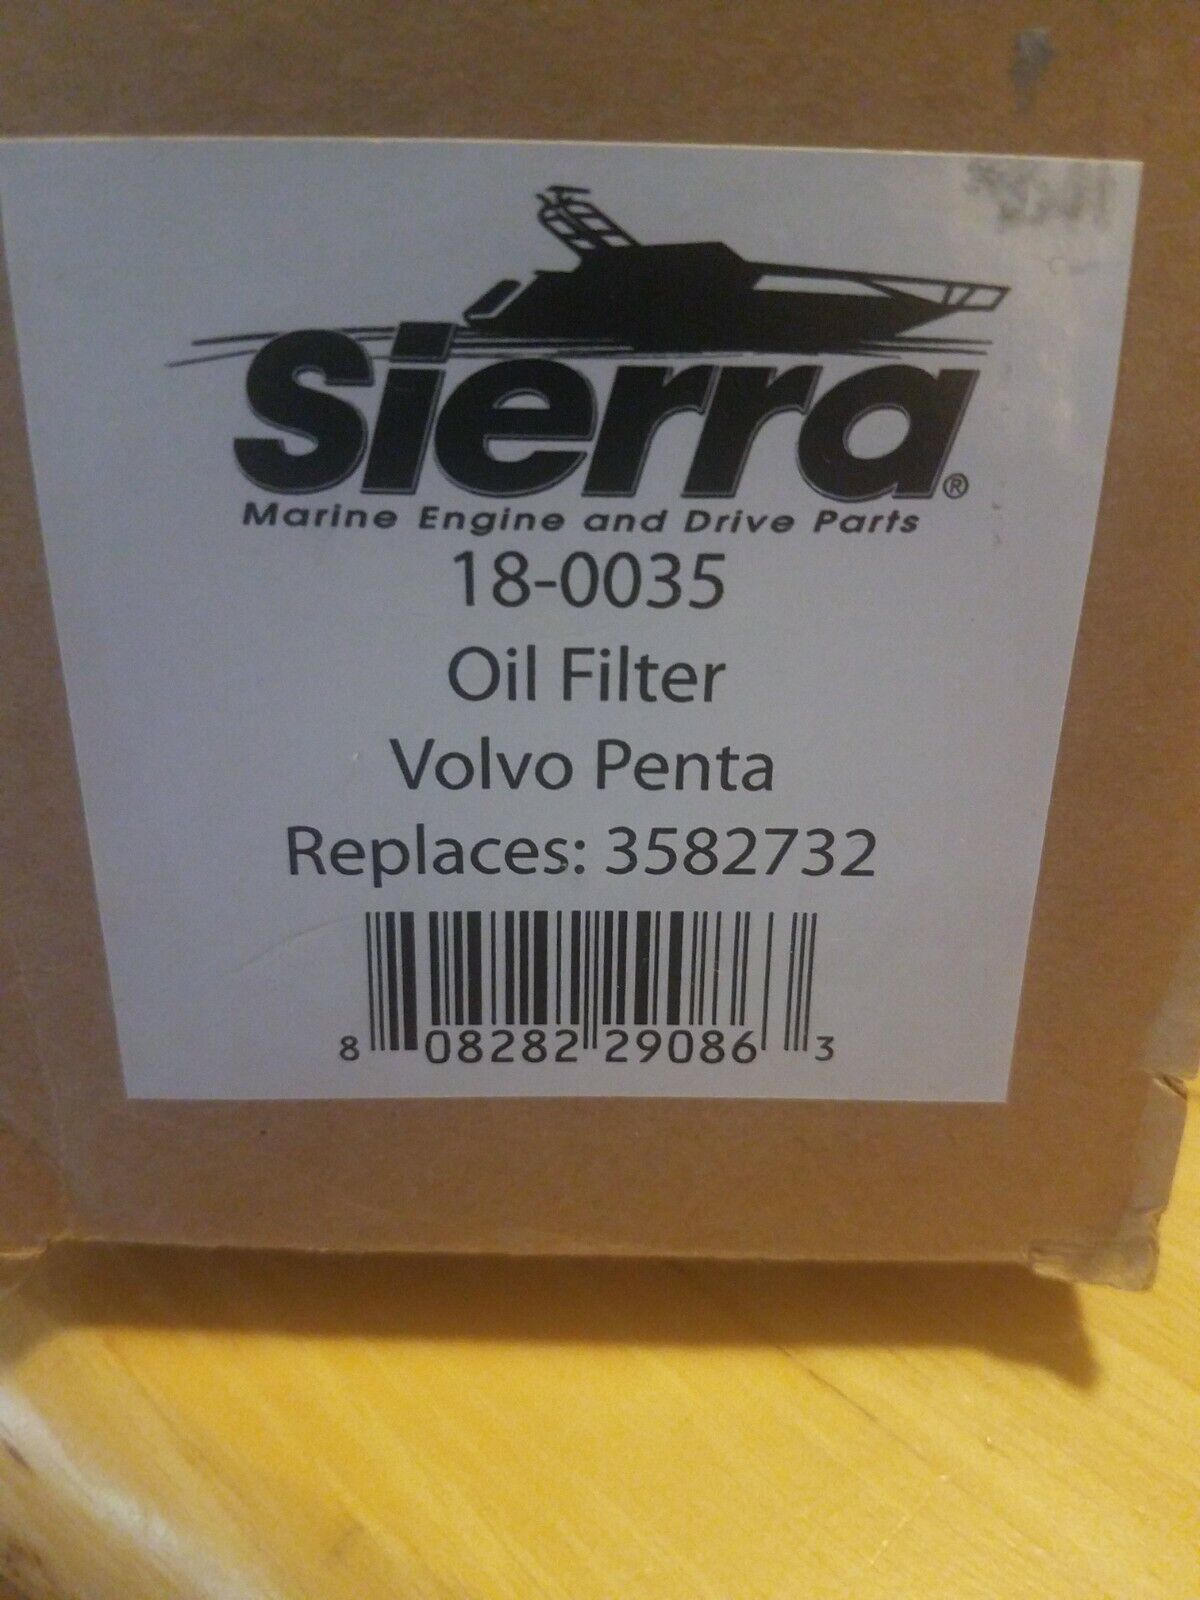 Sierra Marine Engine And Drive Parts 18-0035 Oil Filter Volvo Penta Replaces... - $50.37